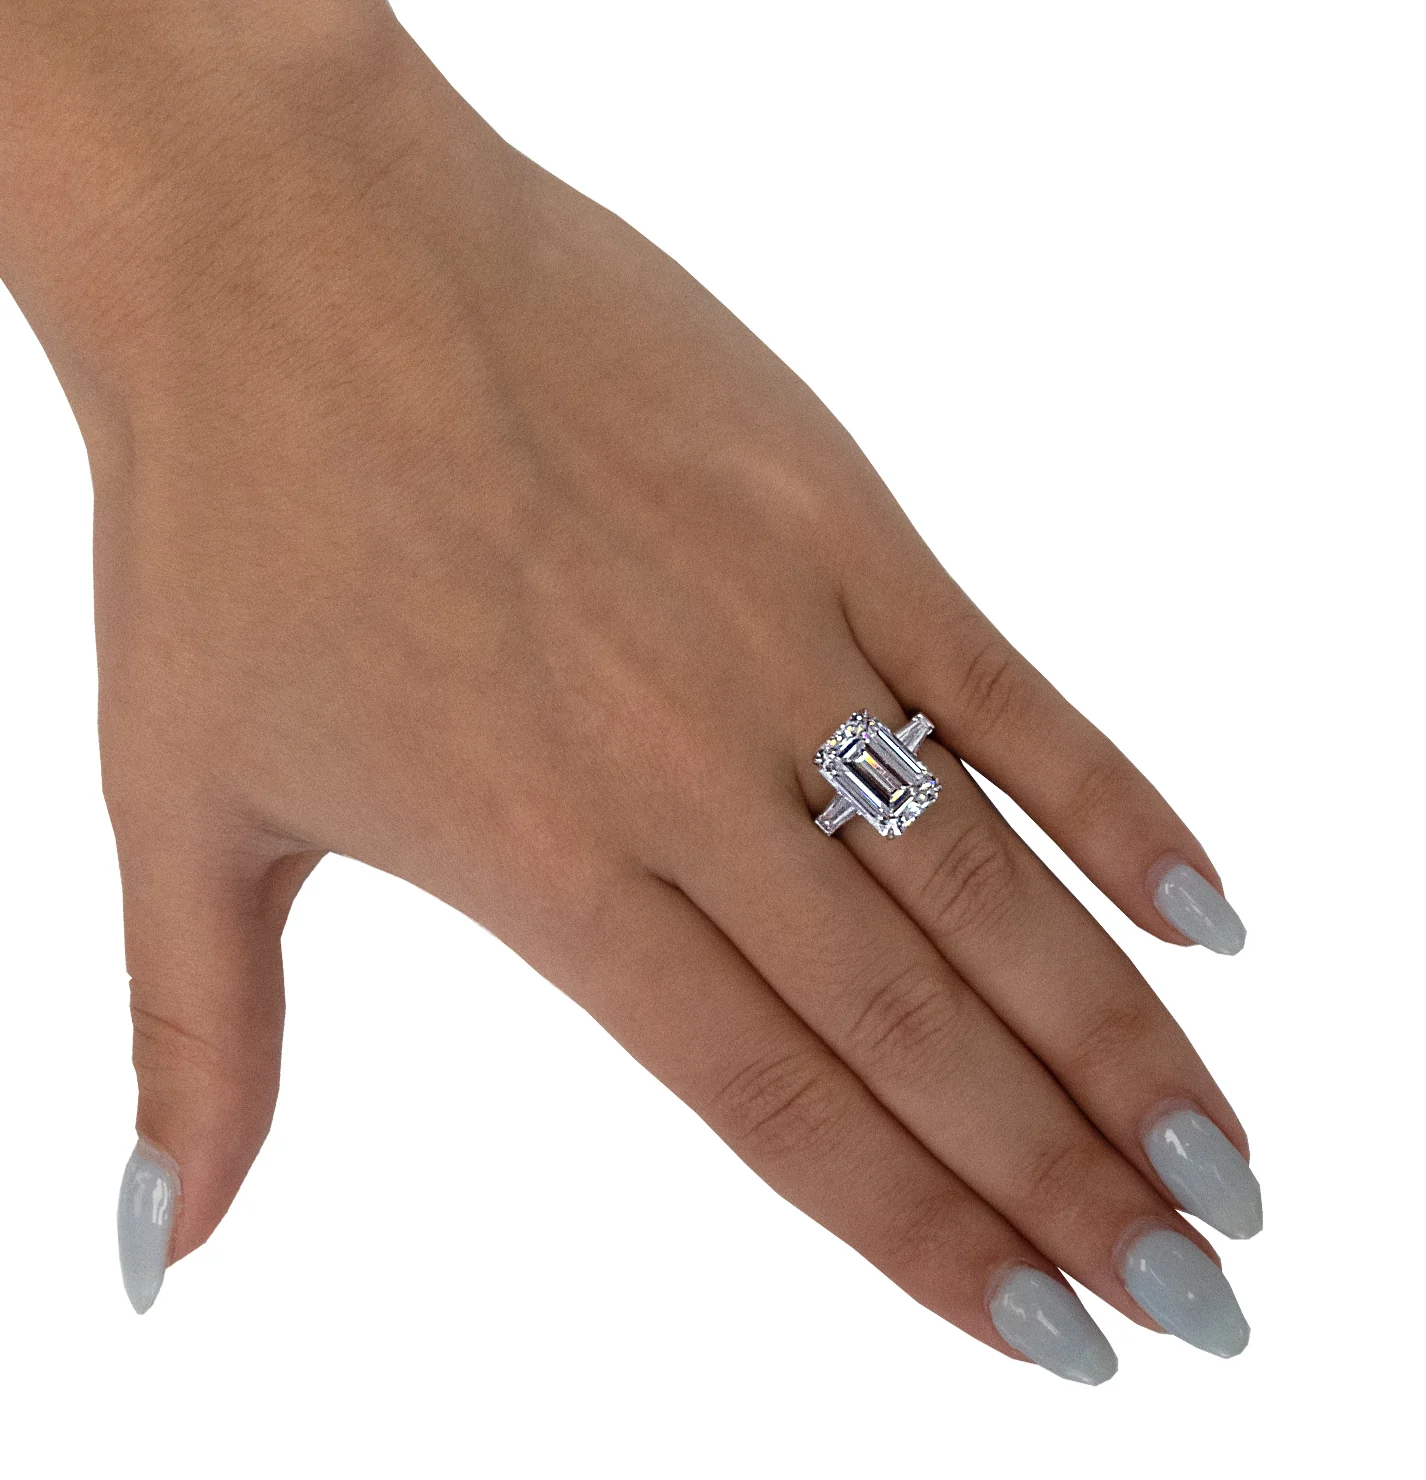 emerald cut diamond engagement ring on the ring finger